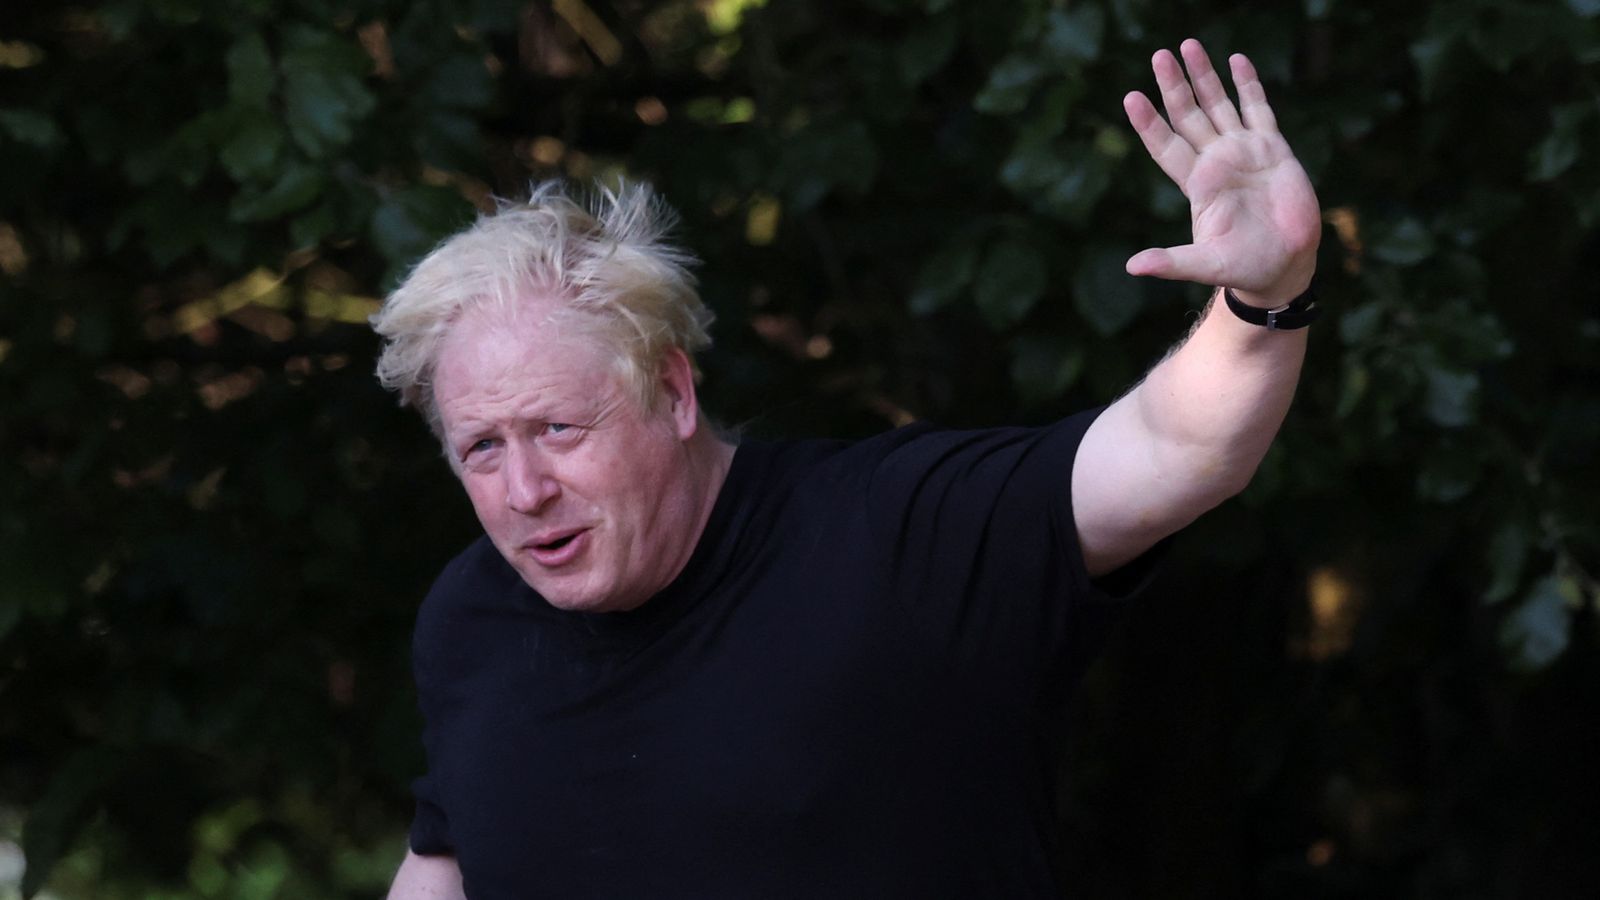 johnson thanks villagers who refused to let him vote without photo id